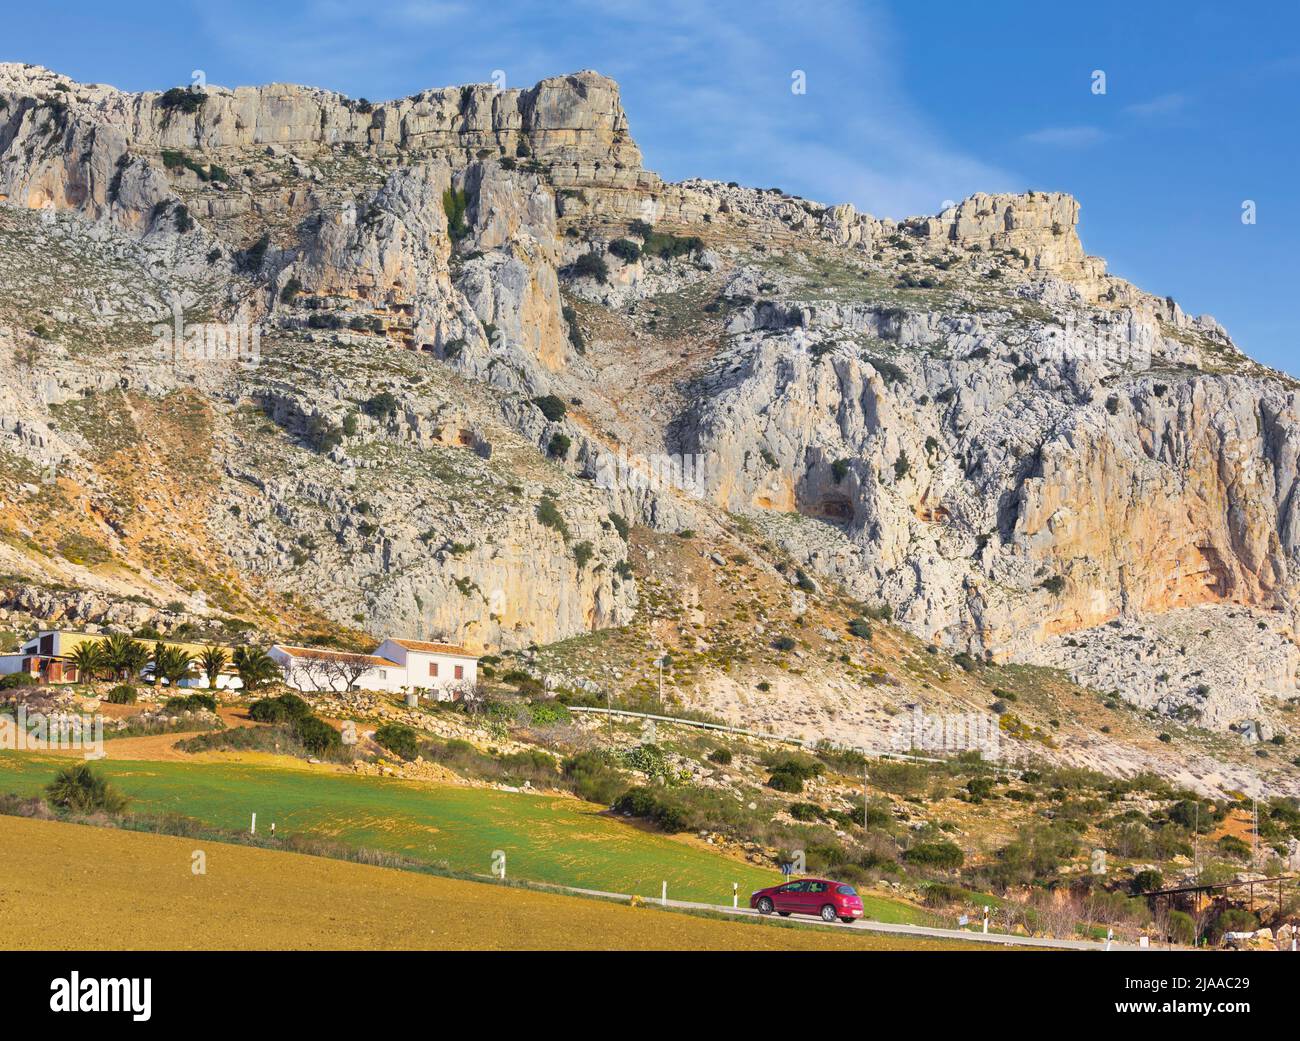 El Torcal, Malaga Province, Andalusia, southern Spain.  El Torcal de Antequera is famous for its karst rock formations. It is part of the Sierra del T Stock Photo